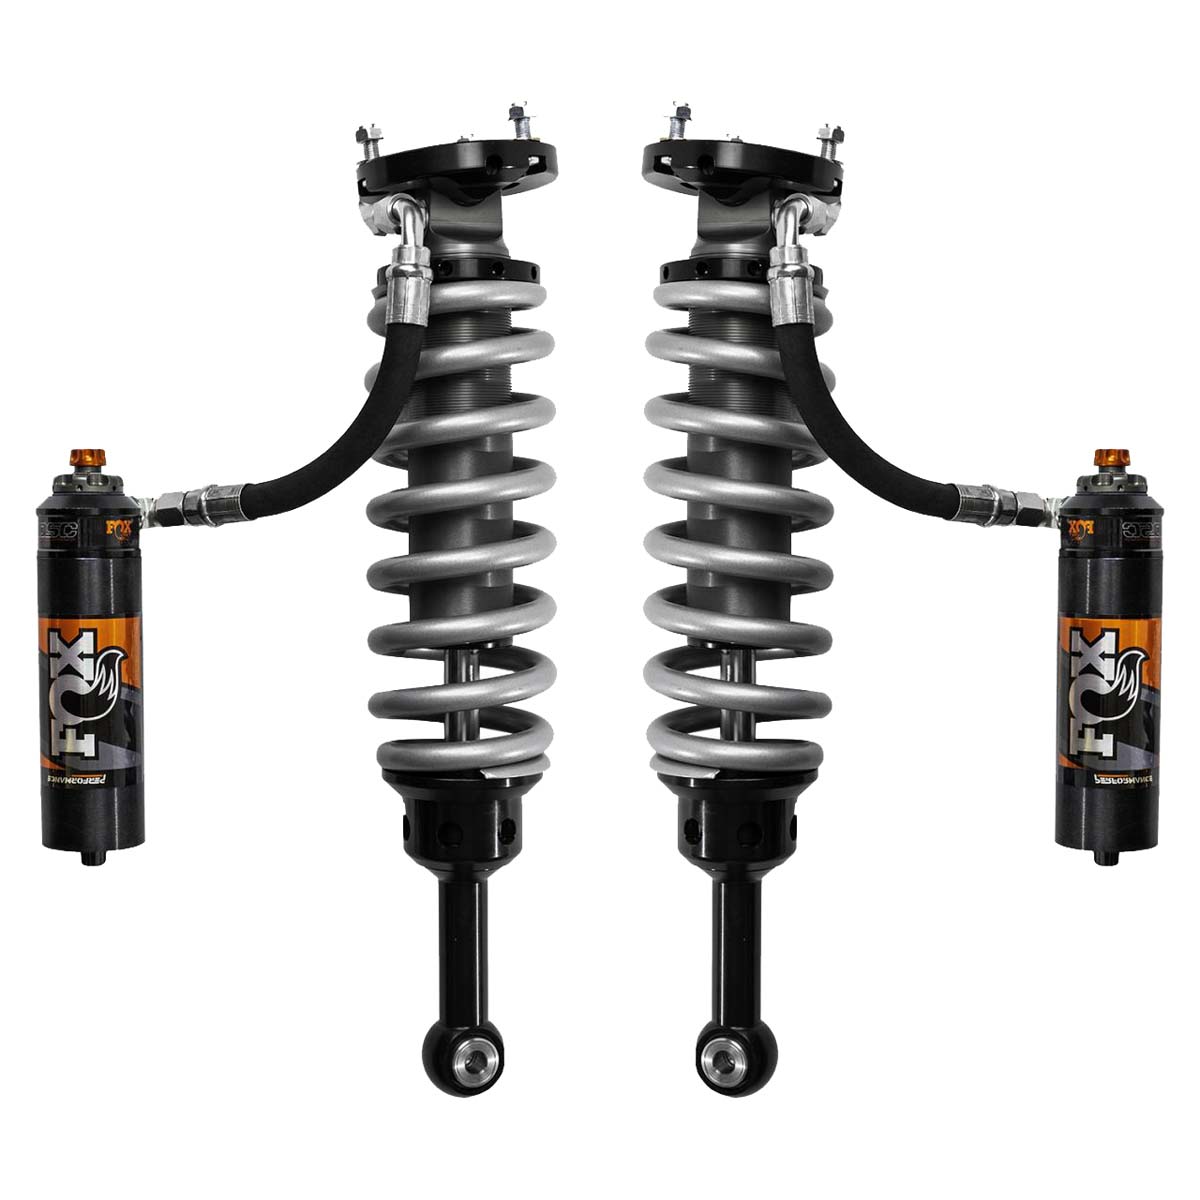 https://www.suspensionlifts.com/wp-content/uploads/2022/03/Fox-Performance-Elite-Series-2-Front-for-2005-2021-Toyota-Tacoma-4WD-2.5-Coilover-Reservior-Shock-Adjustable-883-06-177.jpg